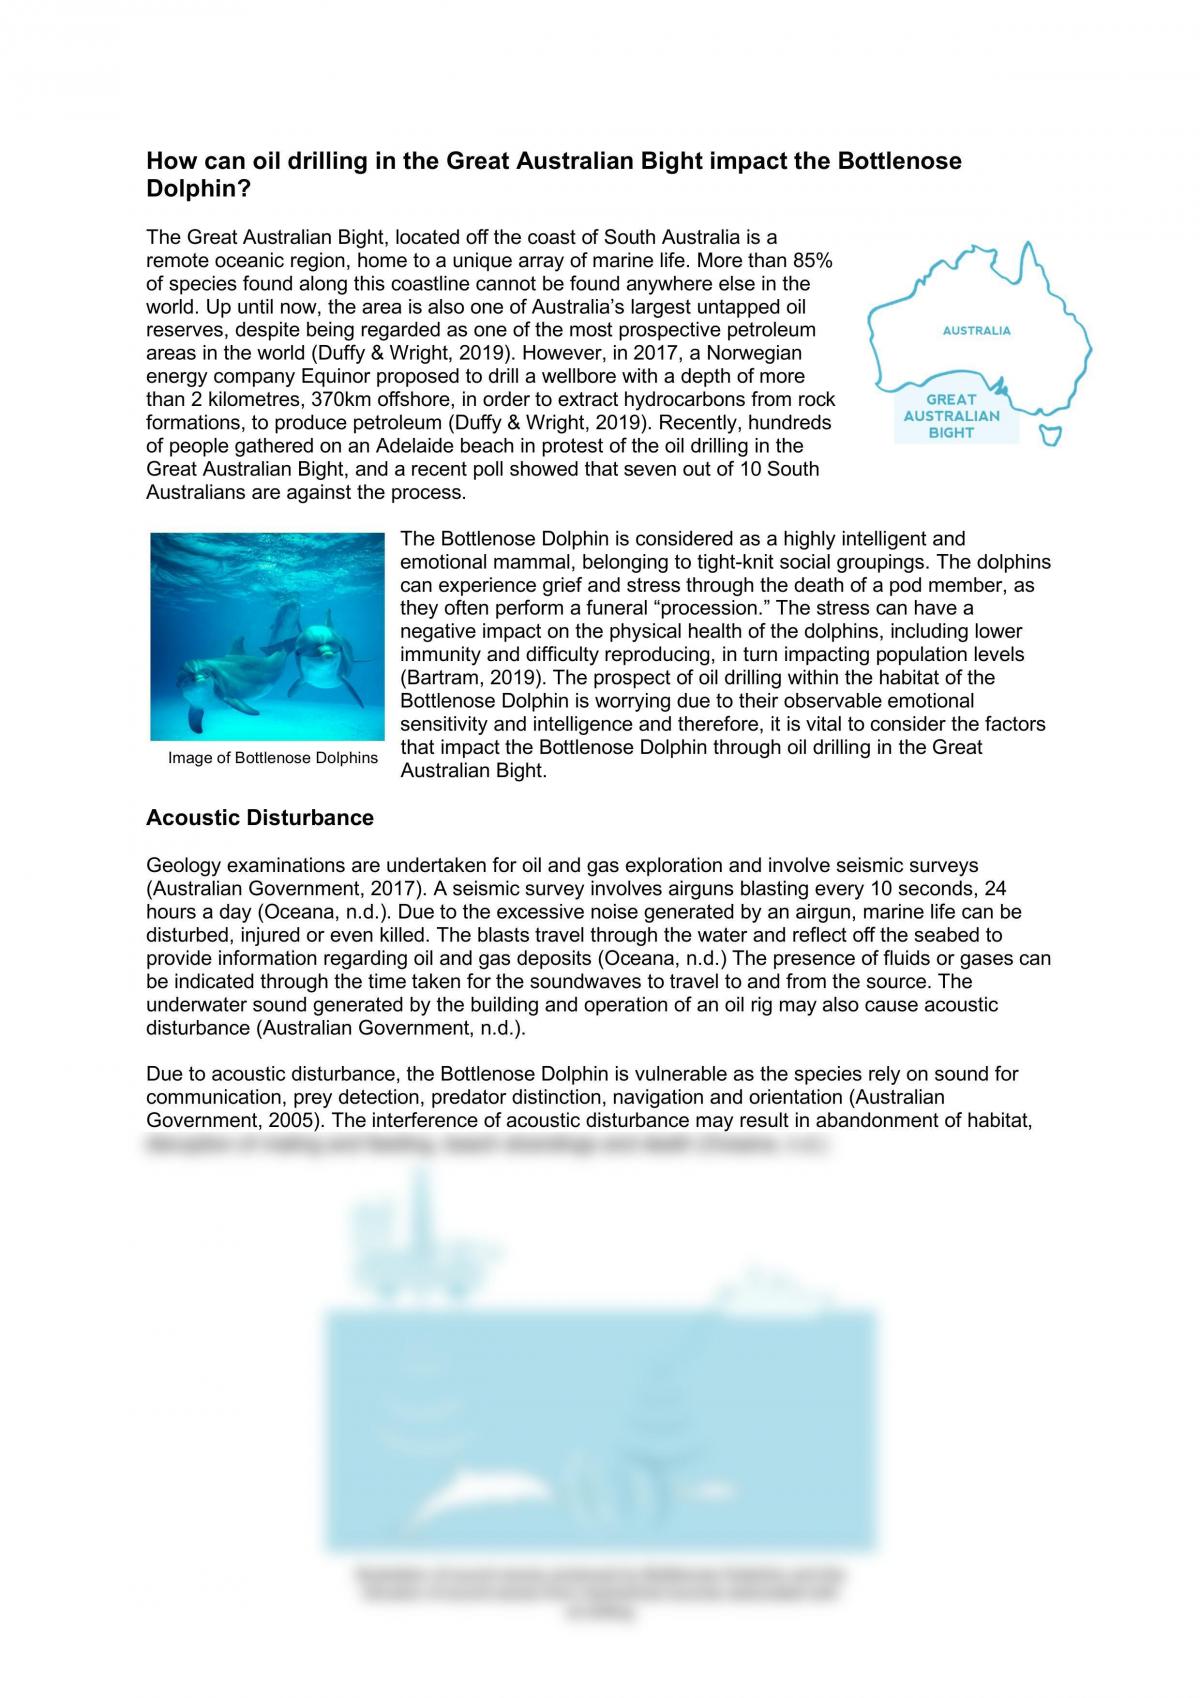 Oil Drilling in the Great Australian Bight Impacts the Bottlenose Dolphin - Page 1